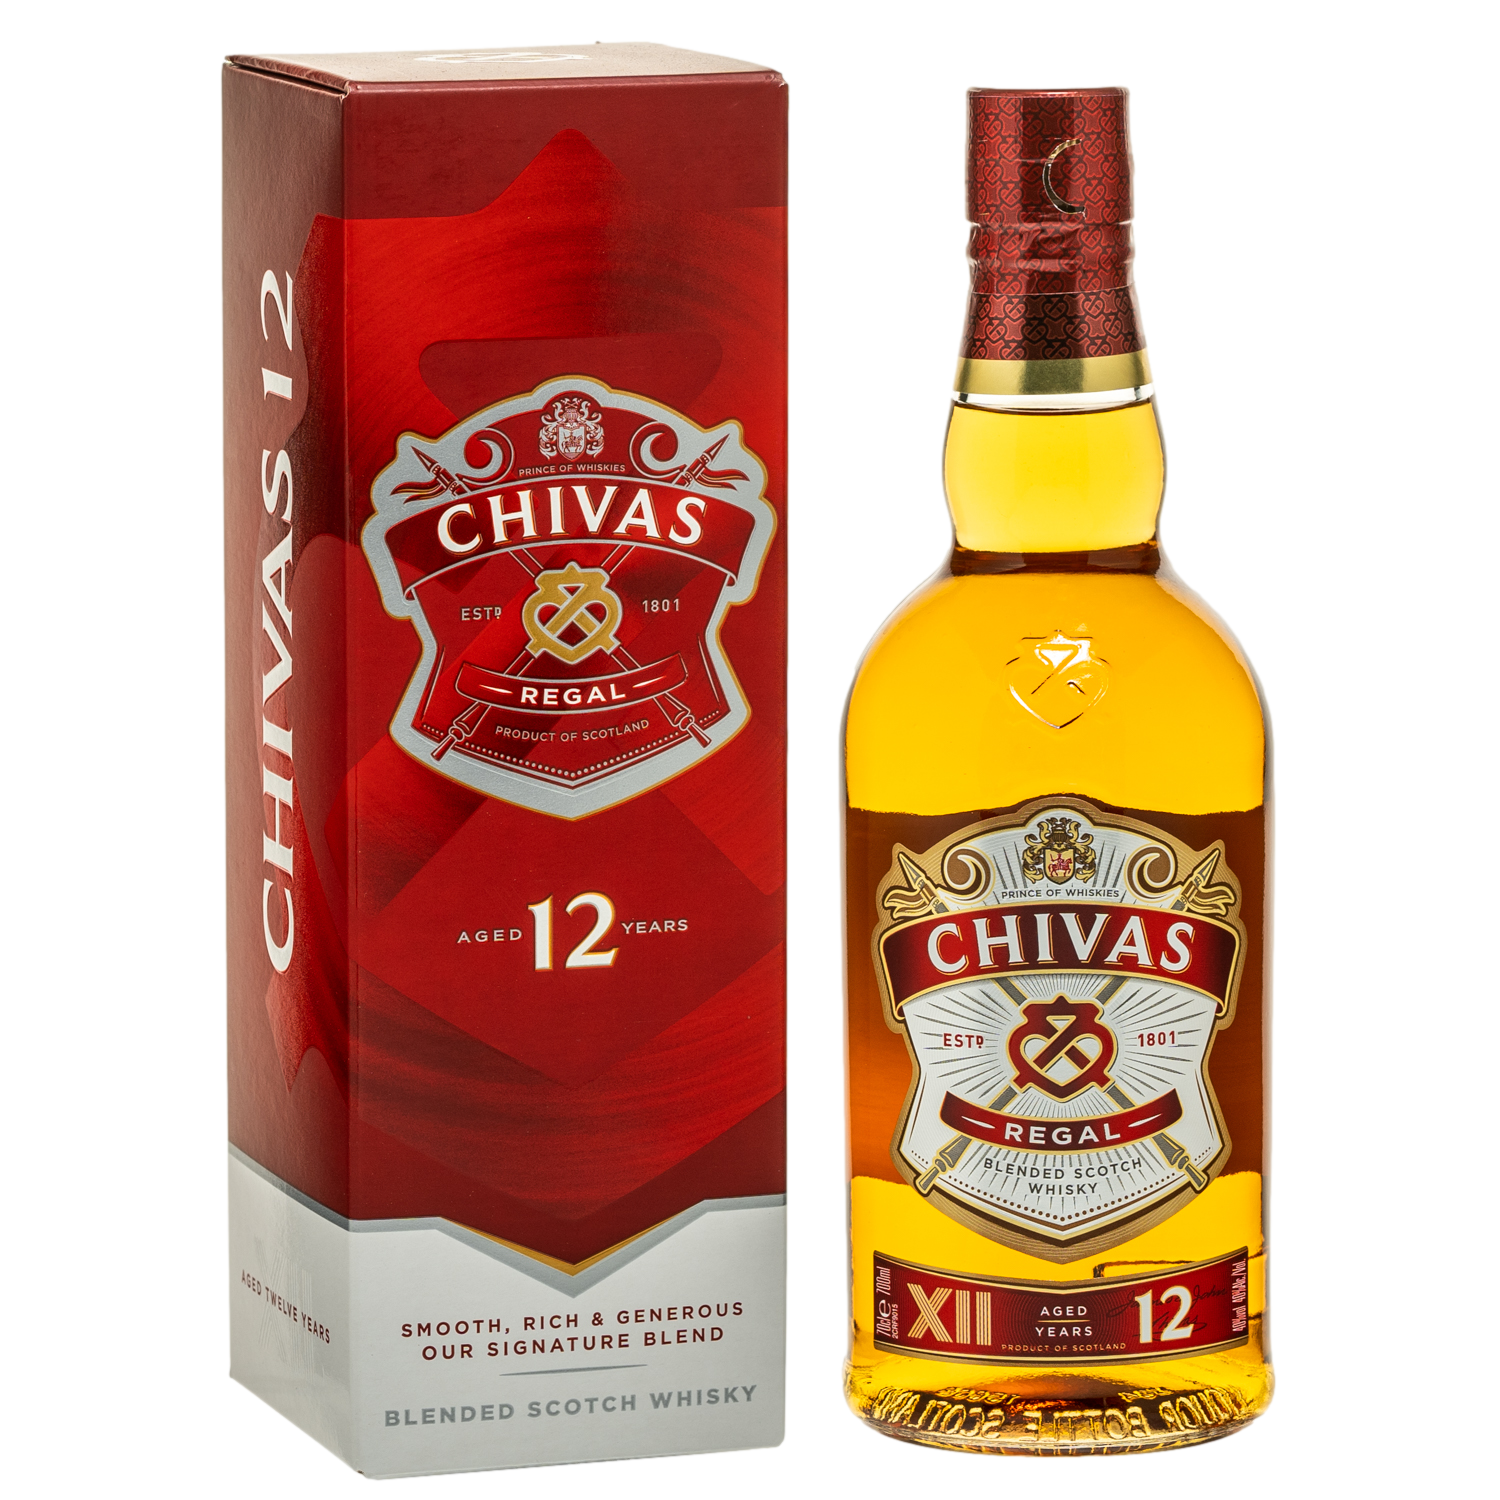 Chivas Regal 12 Jahre Whisky - Blended Scotch Whisky - Barrel Brothers | Whisky